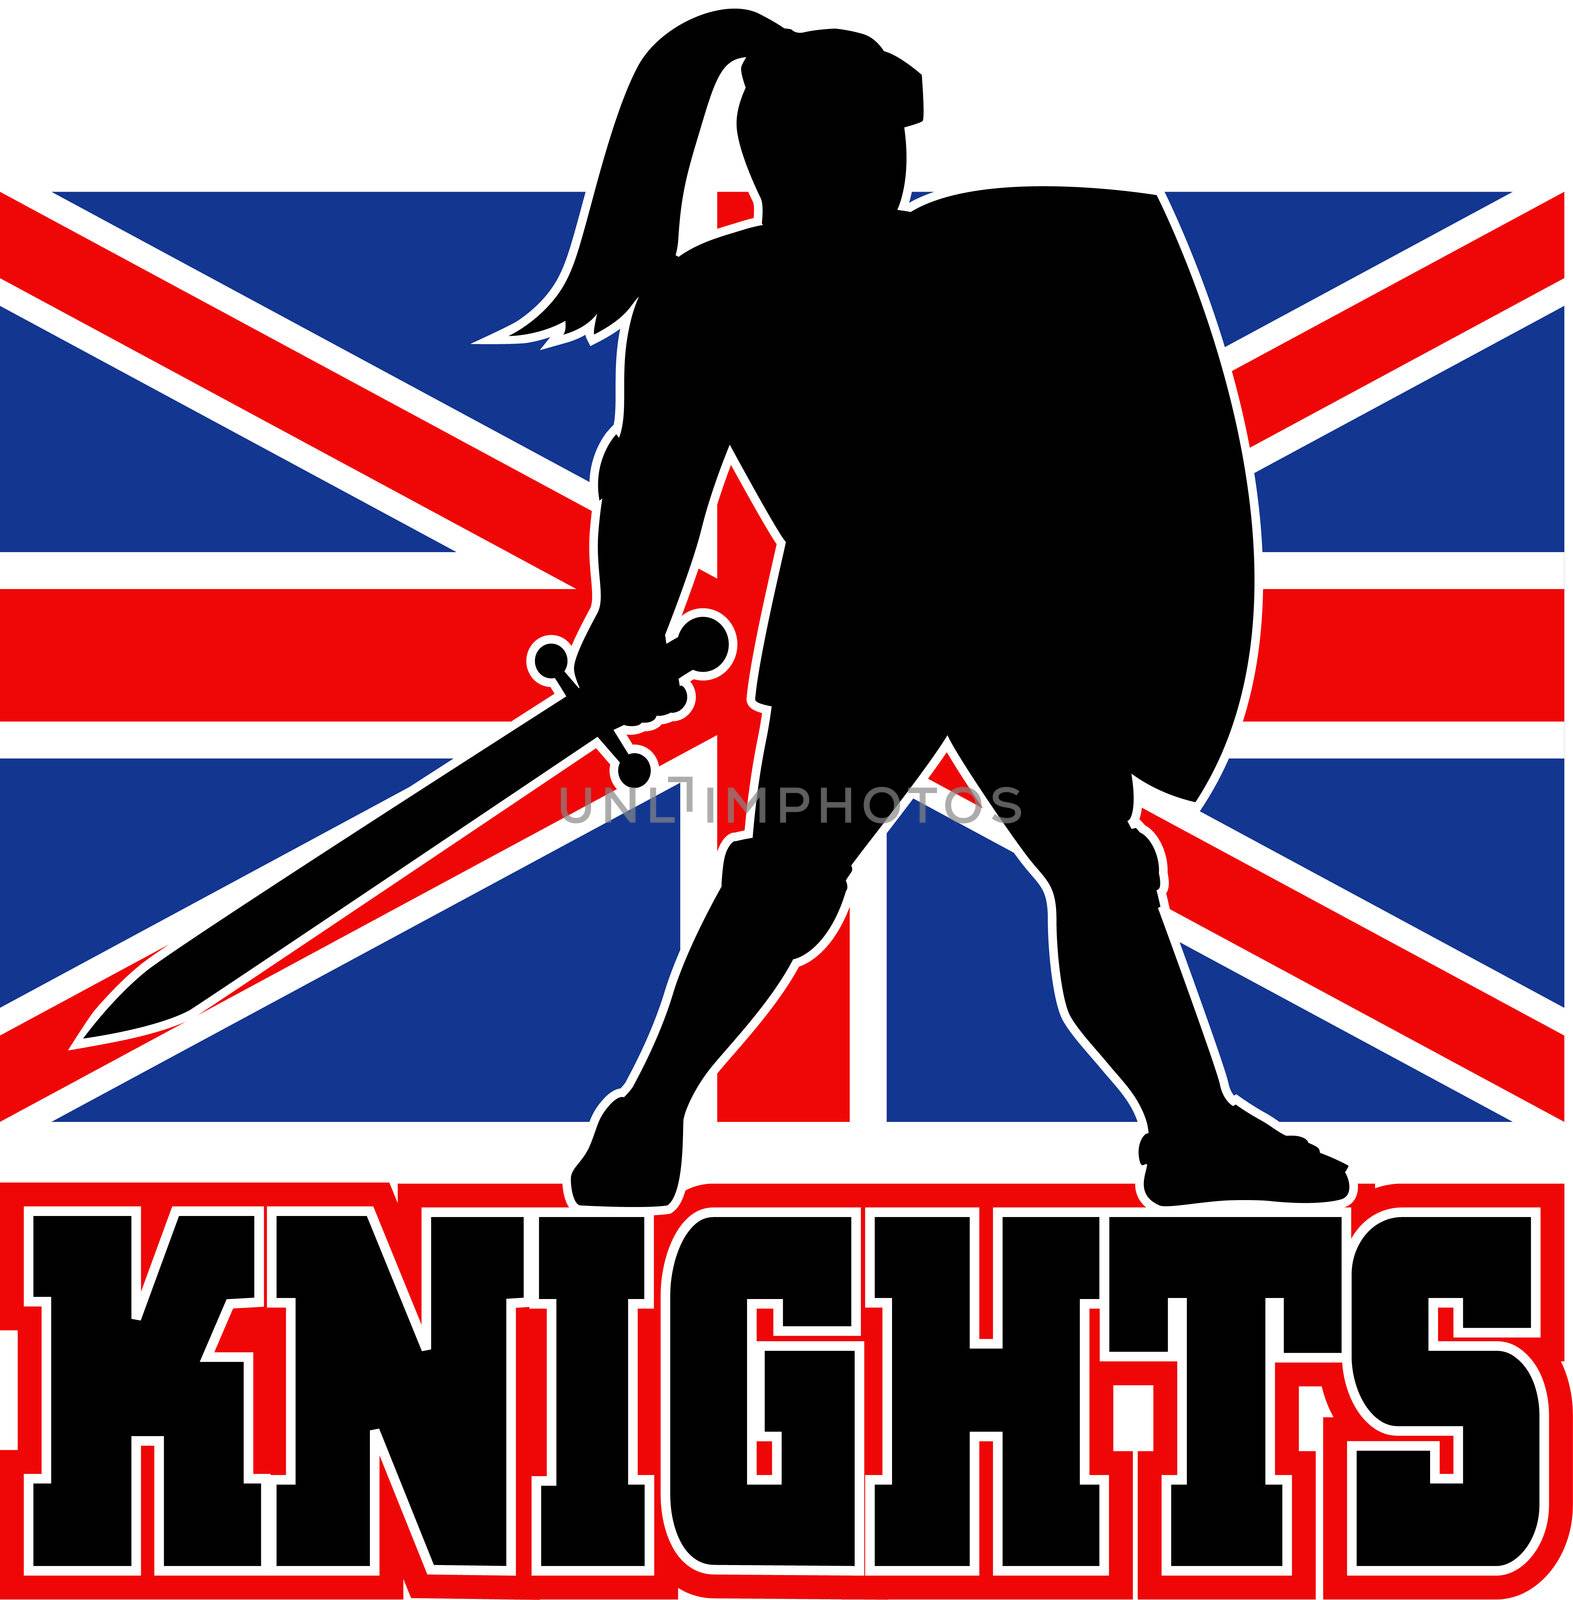 illustration of a Knight silhouette with sword and shield facing side with GB Great Britain British union jack flag in background words "Knights" suitable as mascot for any sports or sporting club or organization